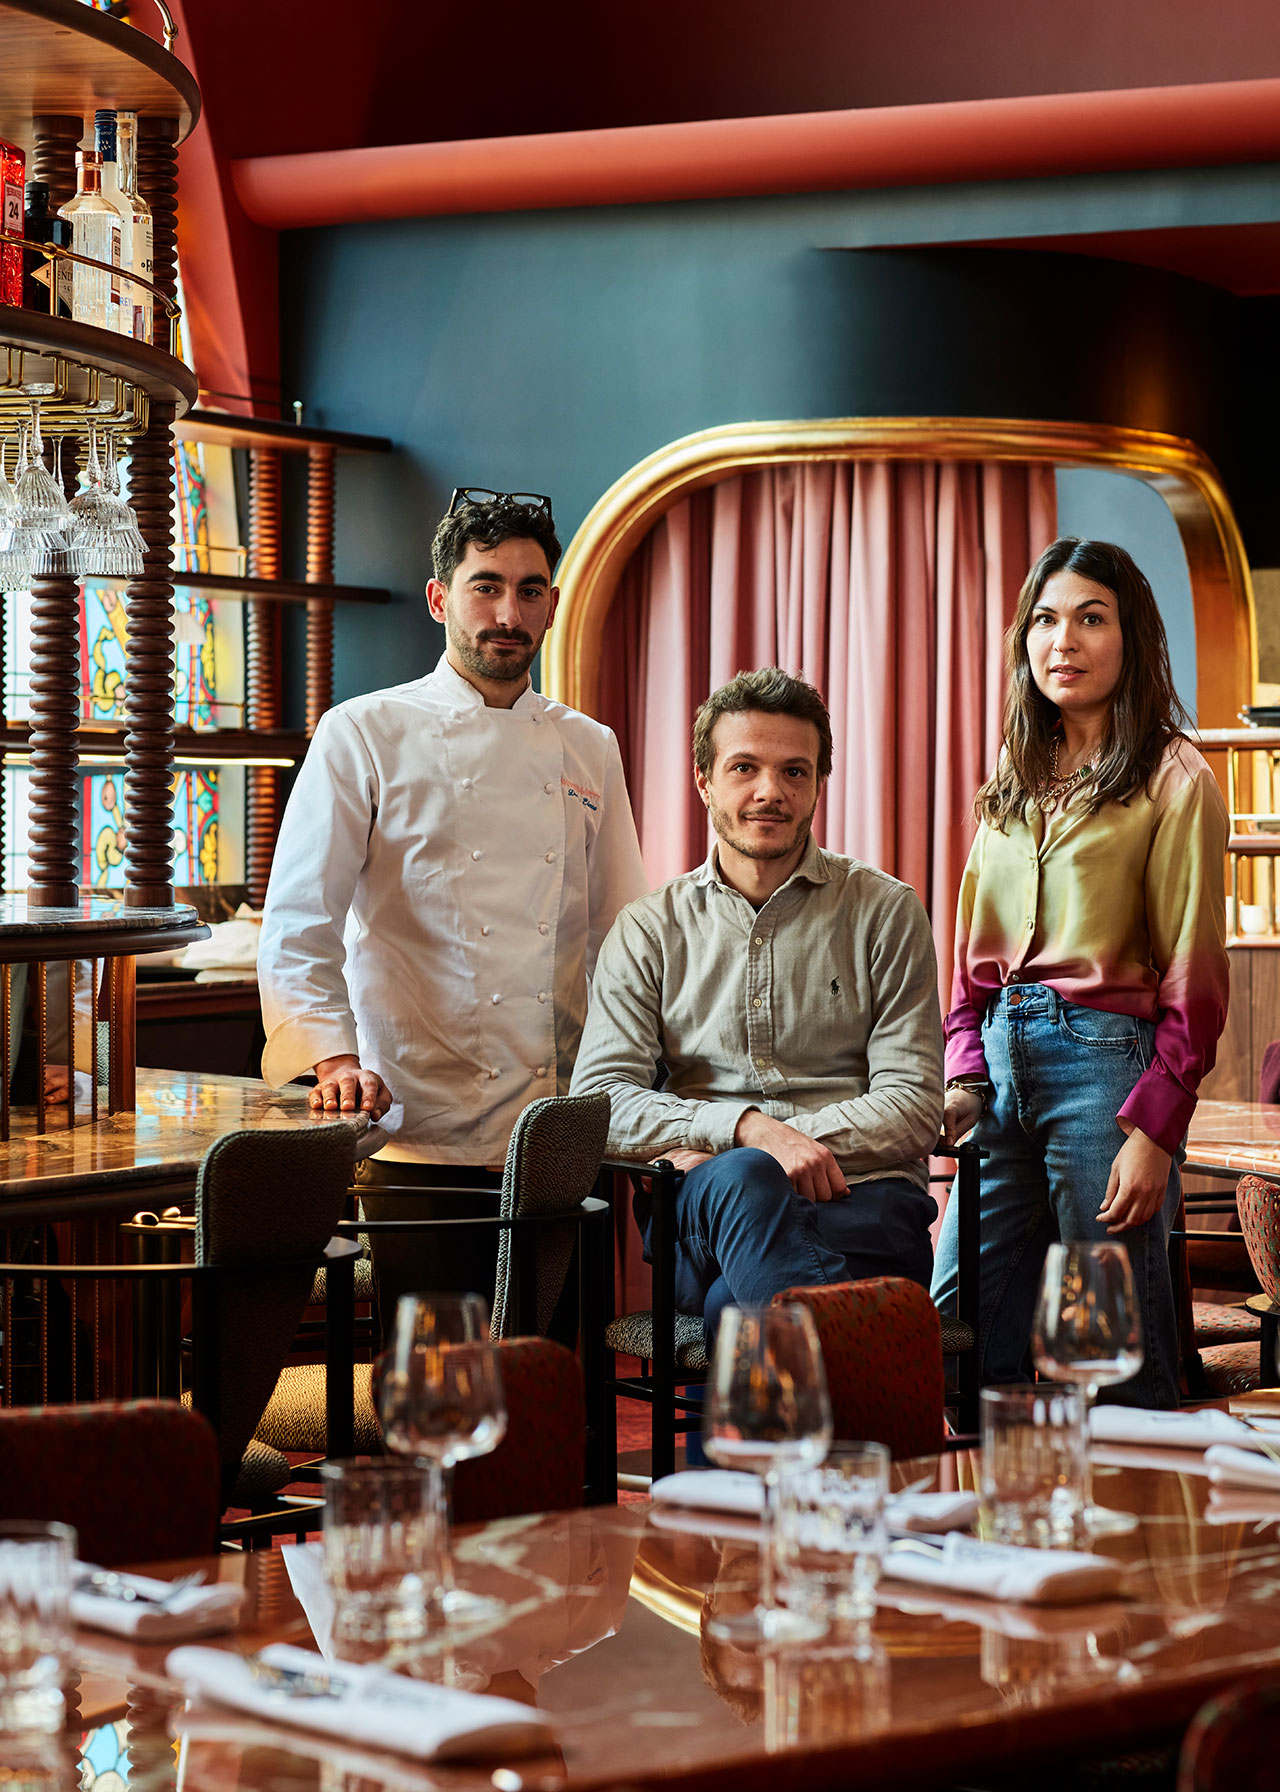 Restaurateurs Magali Faure (right) and Benjamin Demay (middle), and Chef Etienne Daviau.
Photography by DePasquale+Maffini.